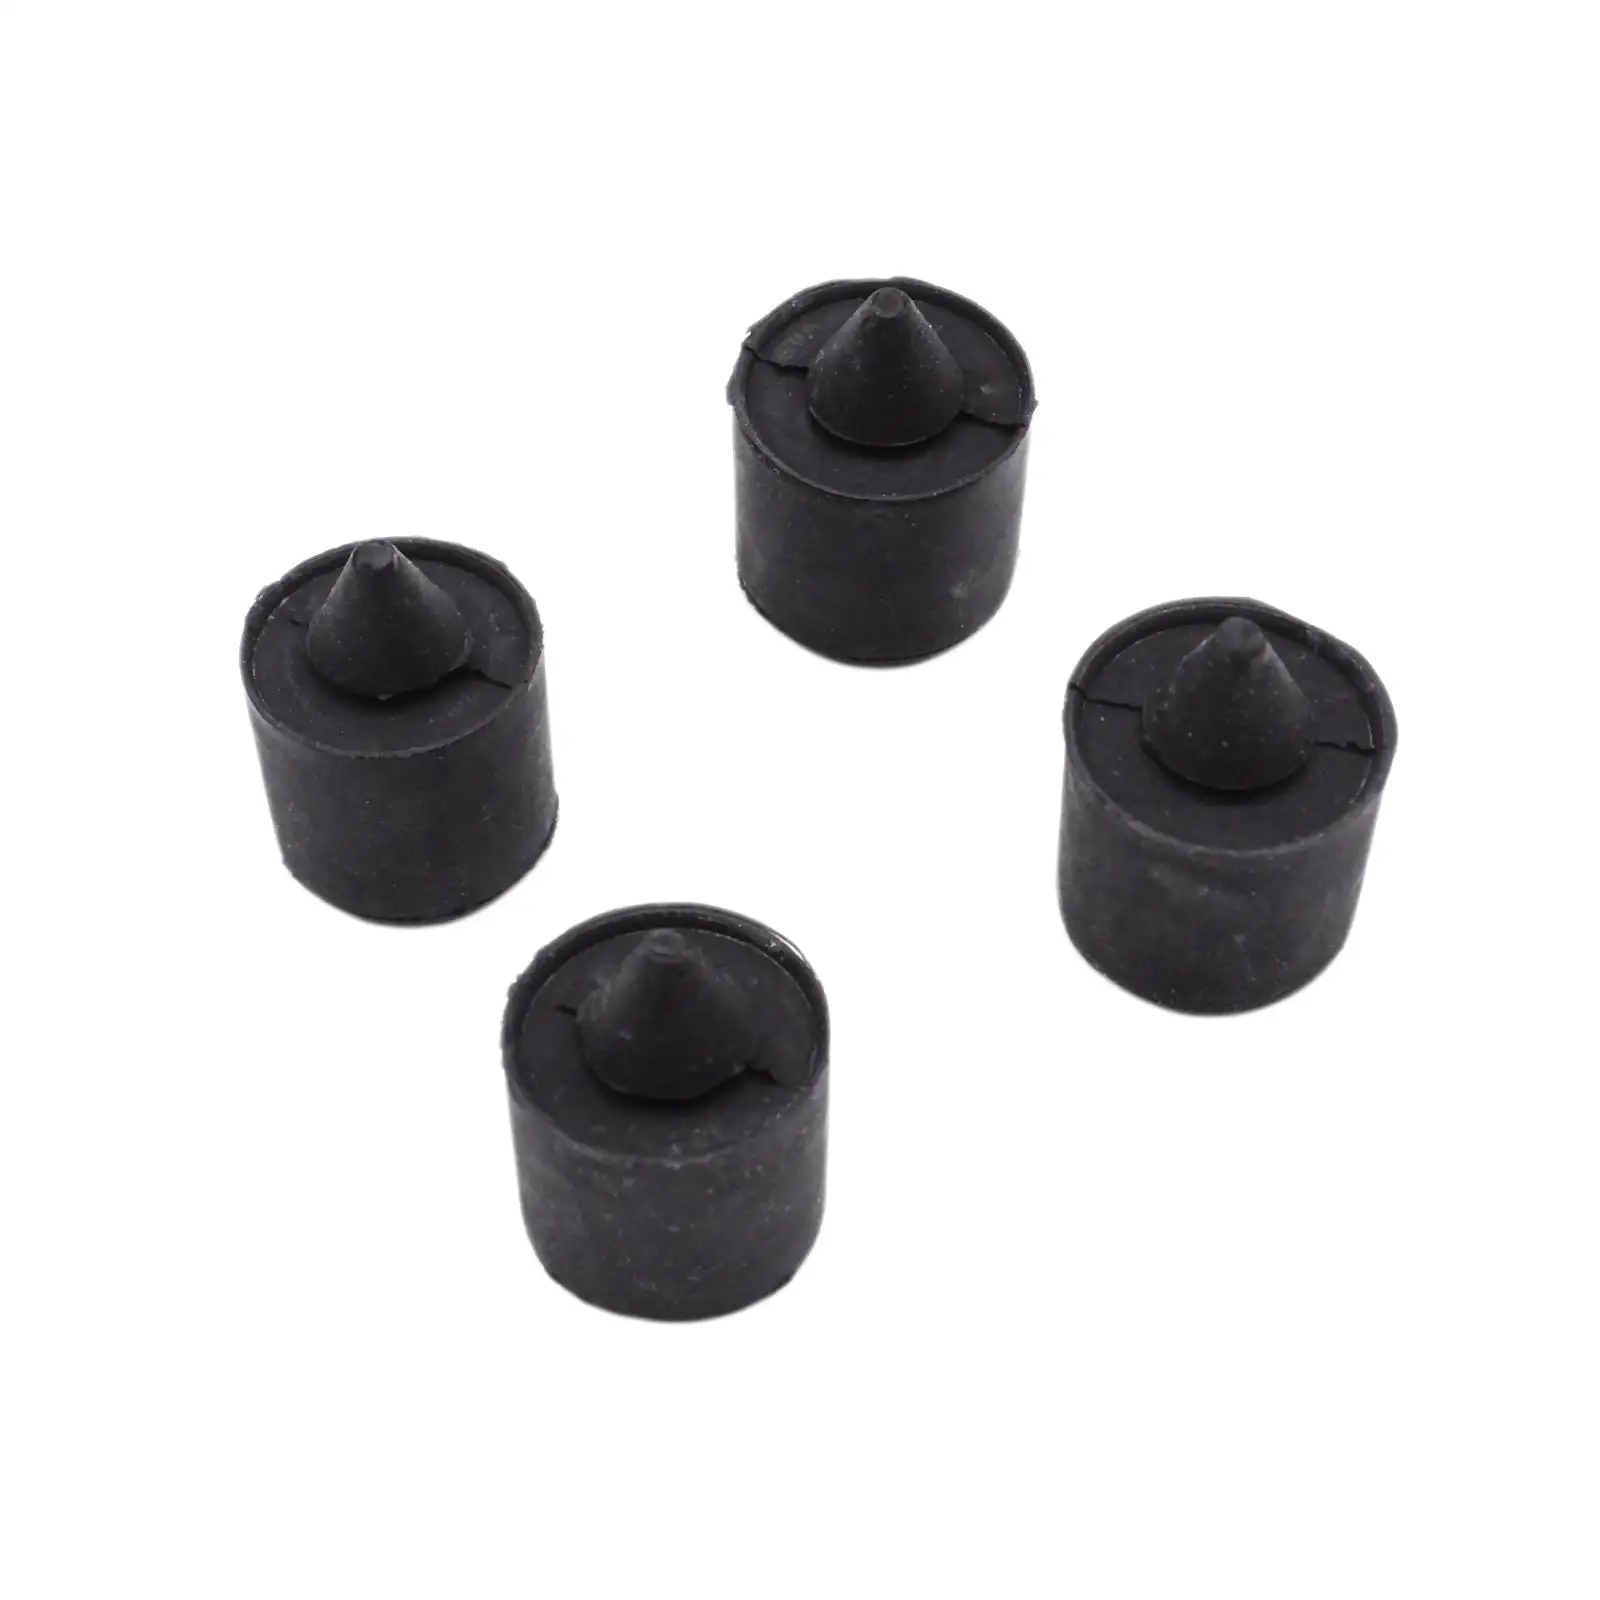 4x Vehicle 16.5mm Exterior Rubber Bumpers W705903-S300 Black for Ford Replace Parts